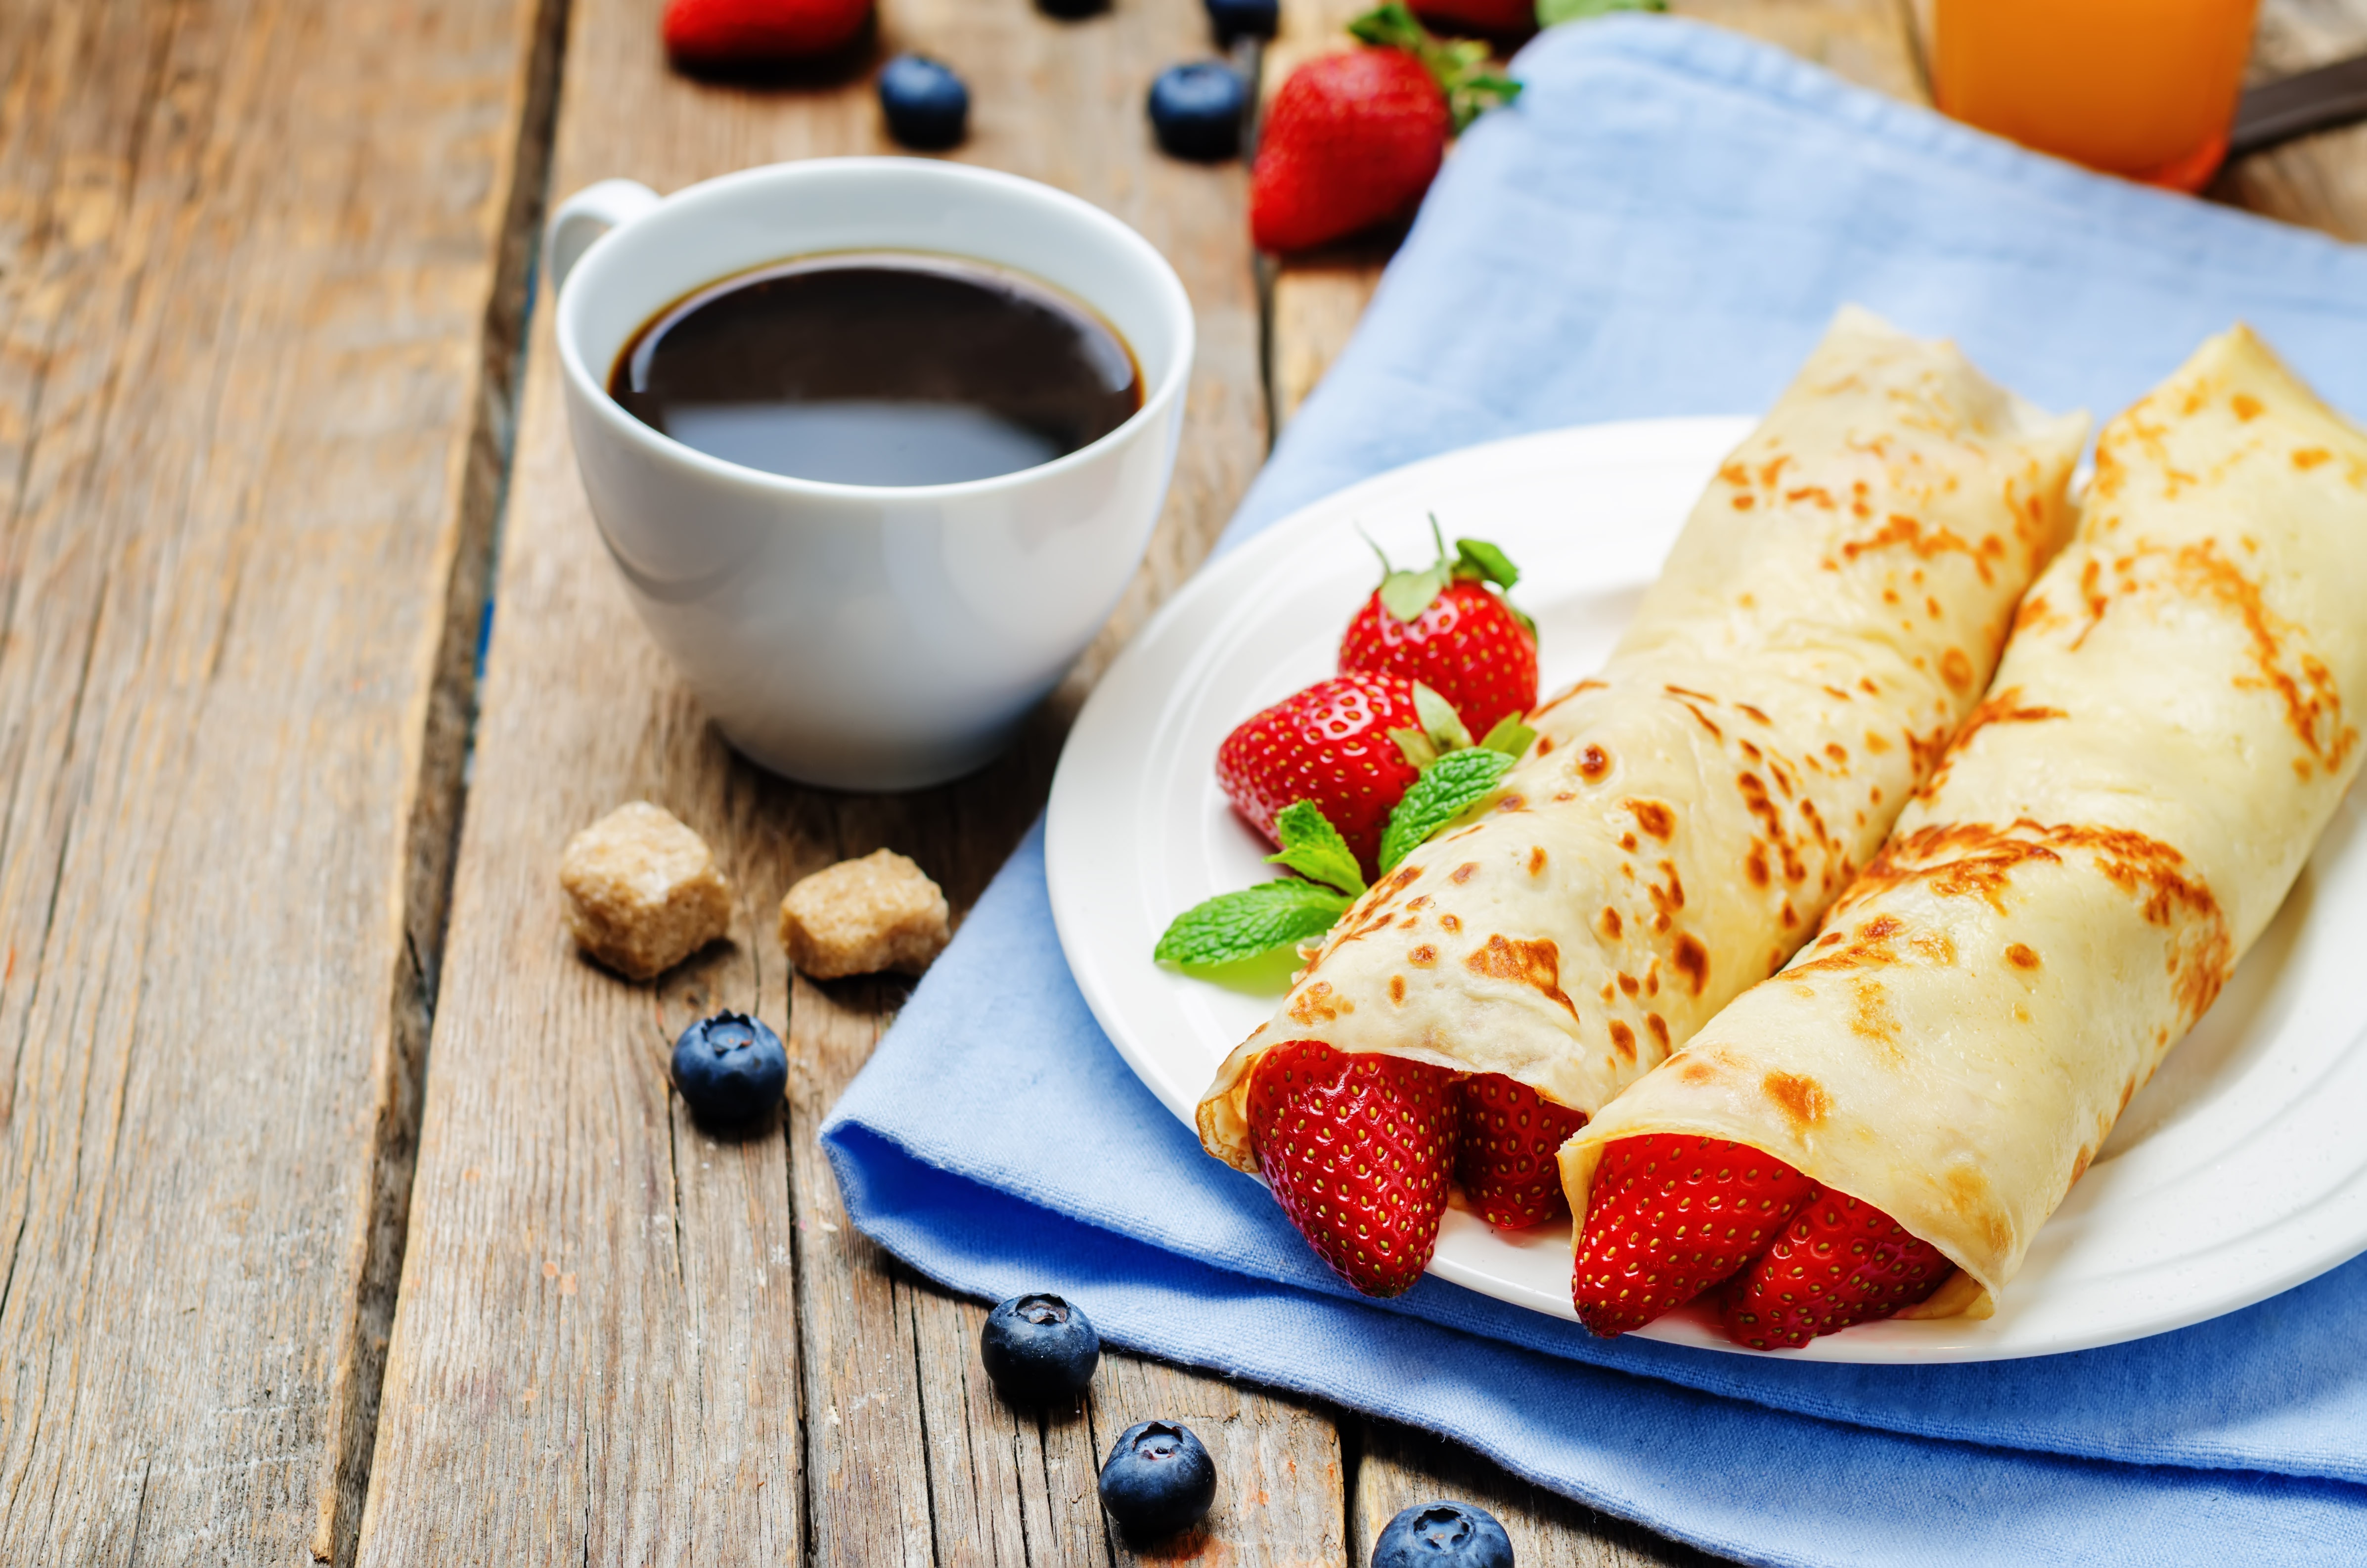 Berry Blueberry Breakfast Coffee Crepe Cup Fruit Still Life Strawberry 4787x3171